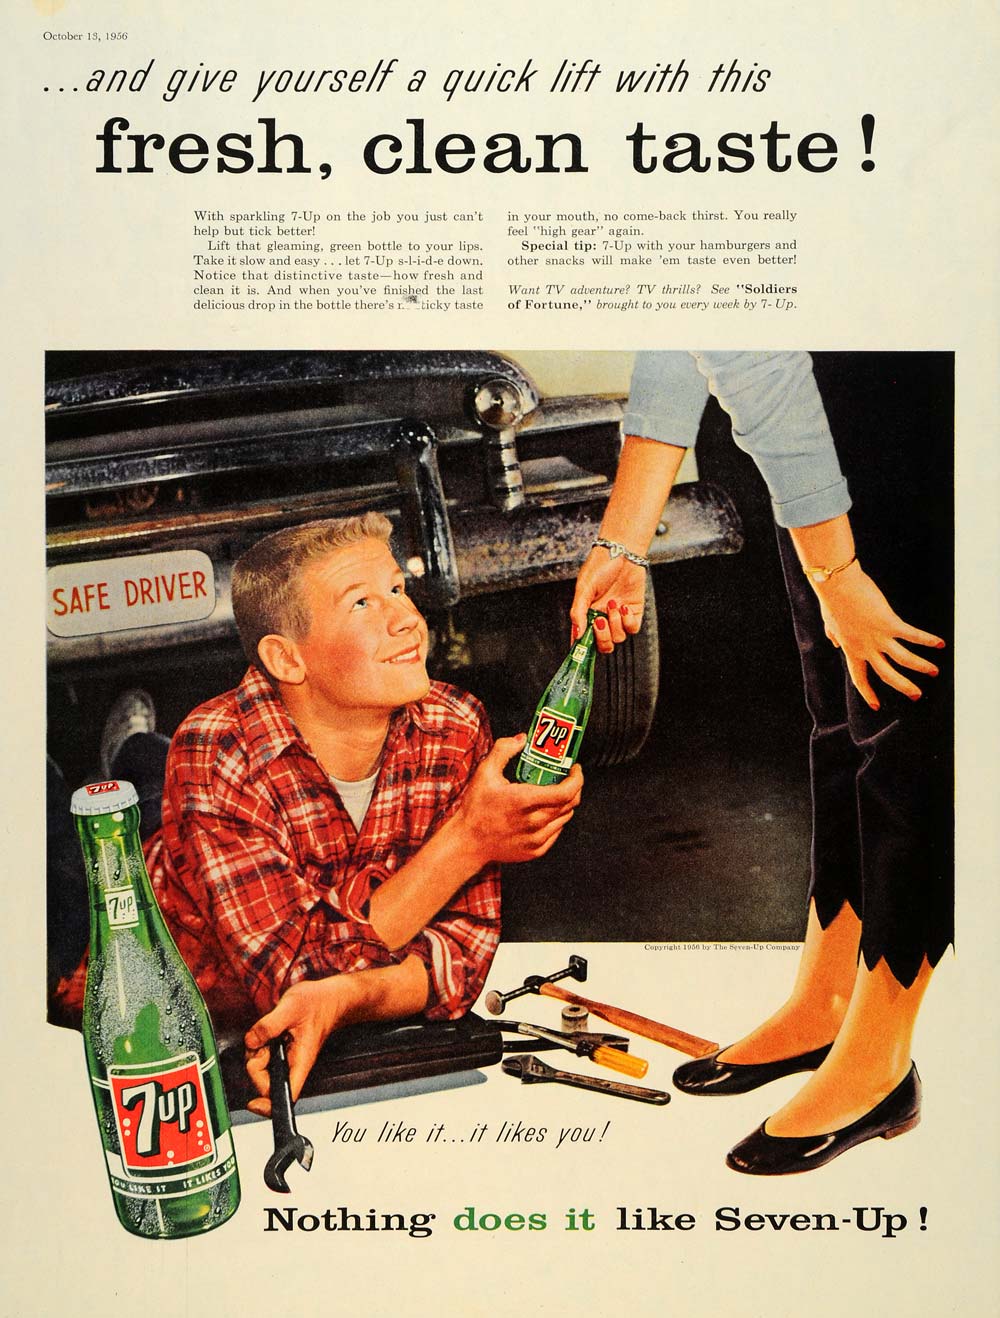 1956 Ad Vintage Car 7-UP Soldiers of Fortune Mechanic - ORIGINAL SEP4